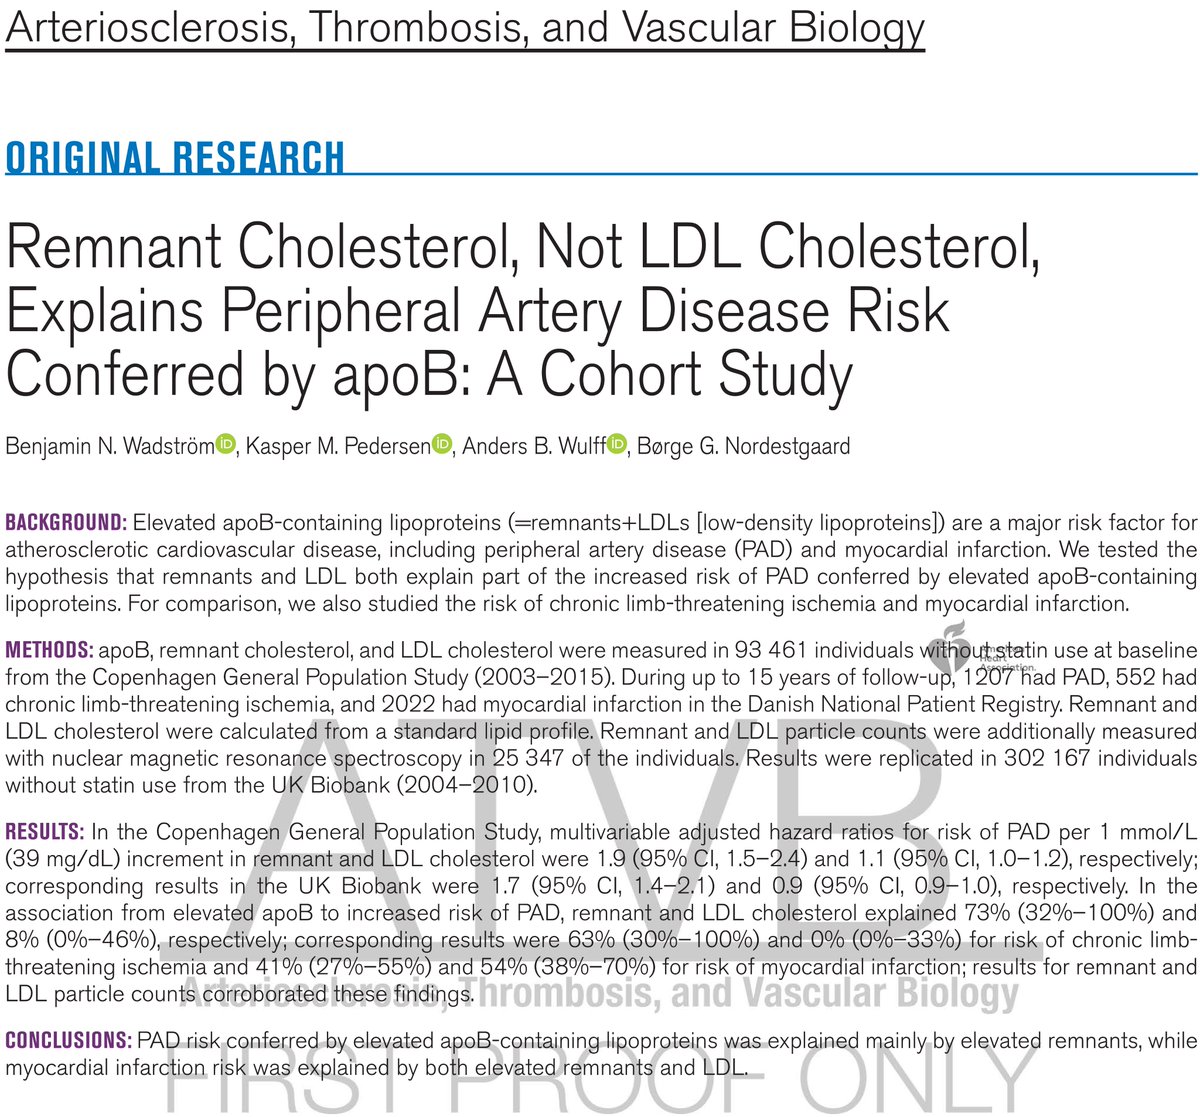 Risk of peripheral artery disease conferred by elevated apoB-containing lipoproteins was explained mainly by elevated remnants, while risk of myocardial infarction was explained by both elevated remnants and LDL. ahajournals.org/doi/10.1161/AT…